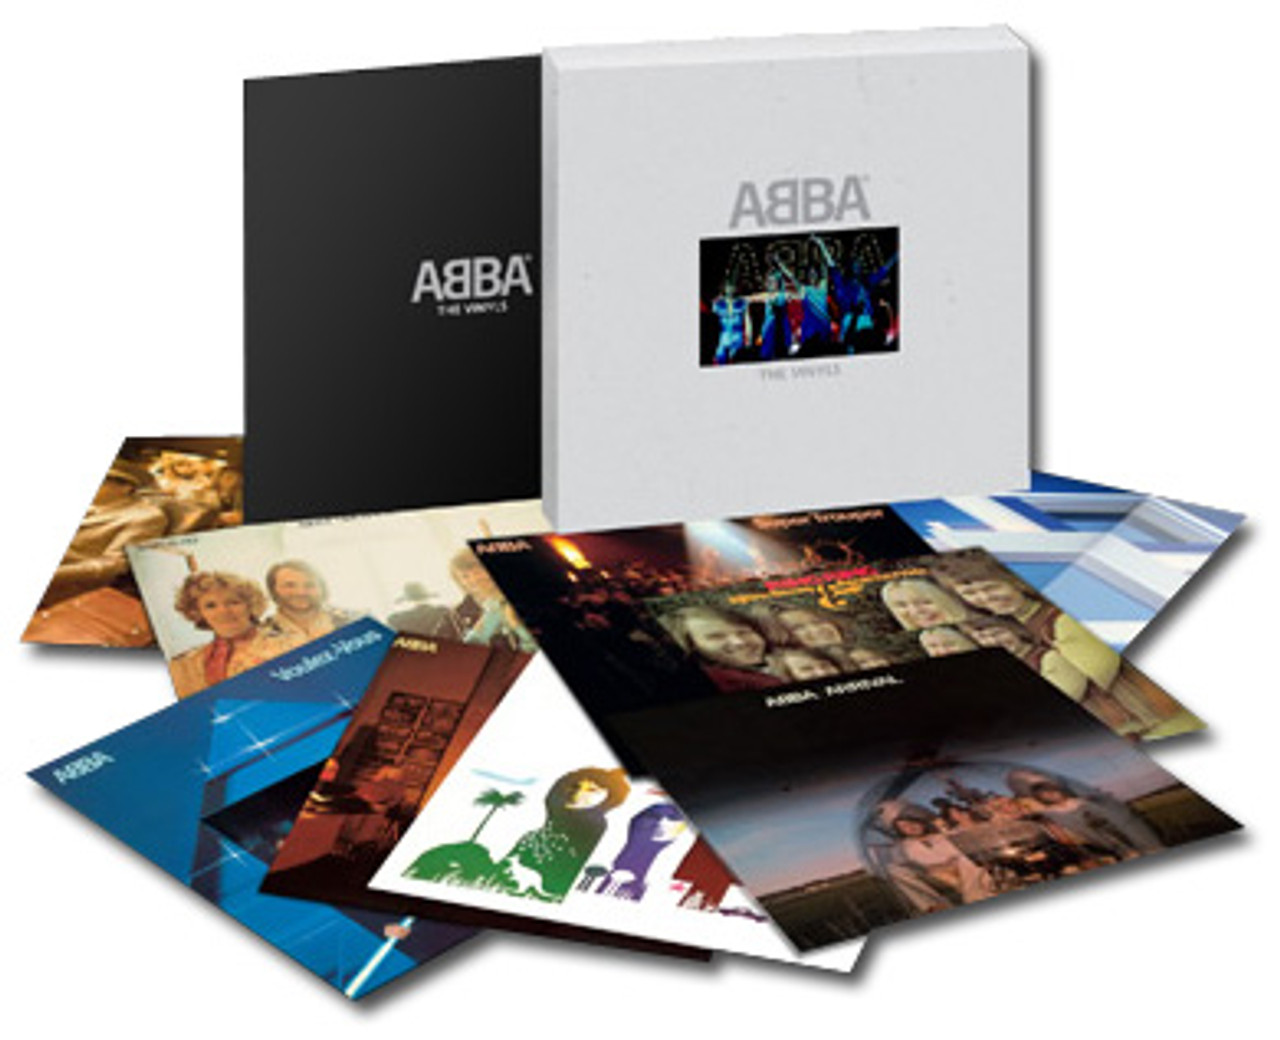  ABBA: In Concert 1979 : Abba, Benny Andersson: CDs & Vinyl